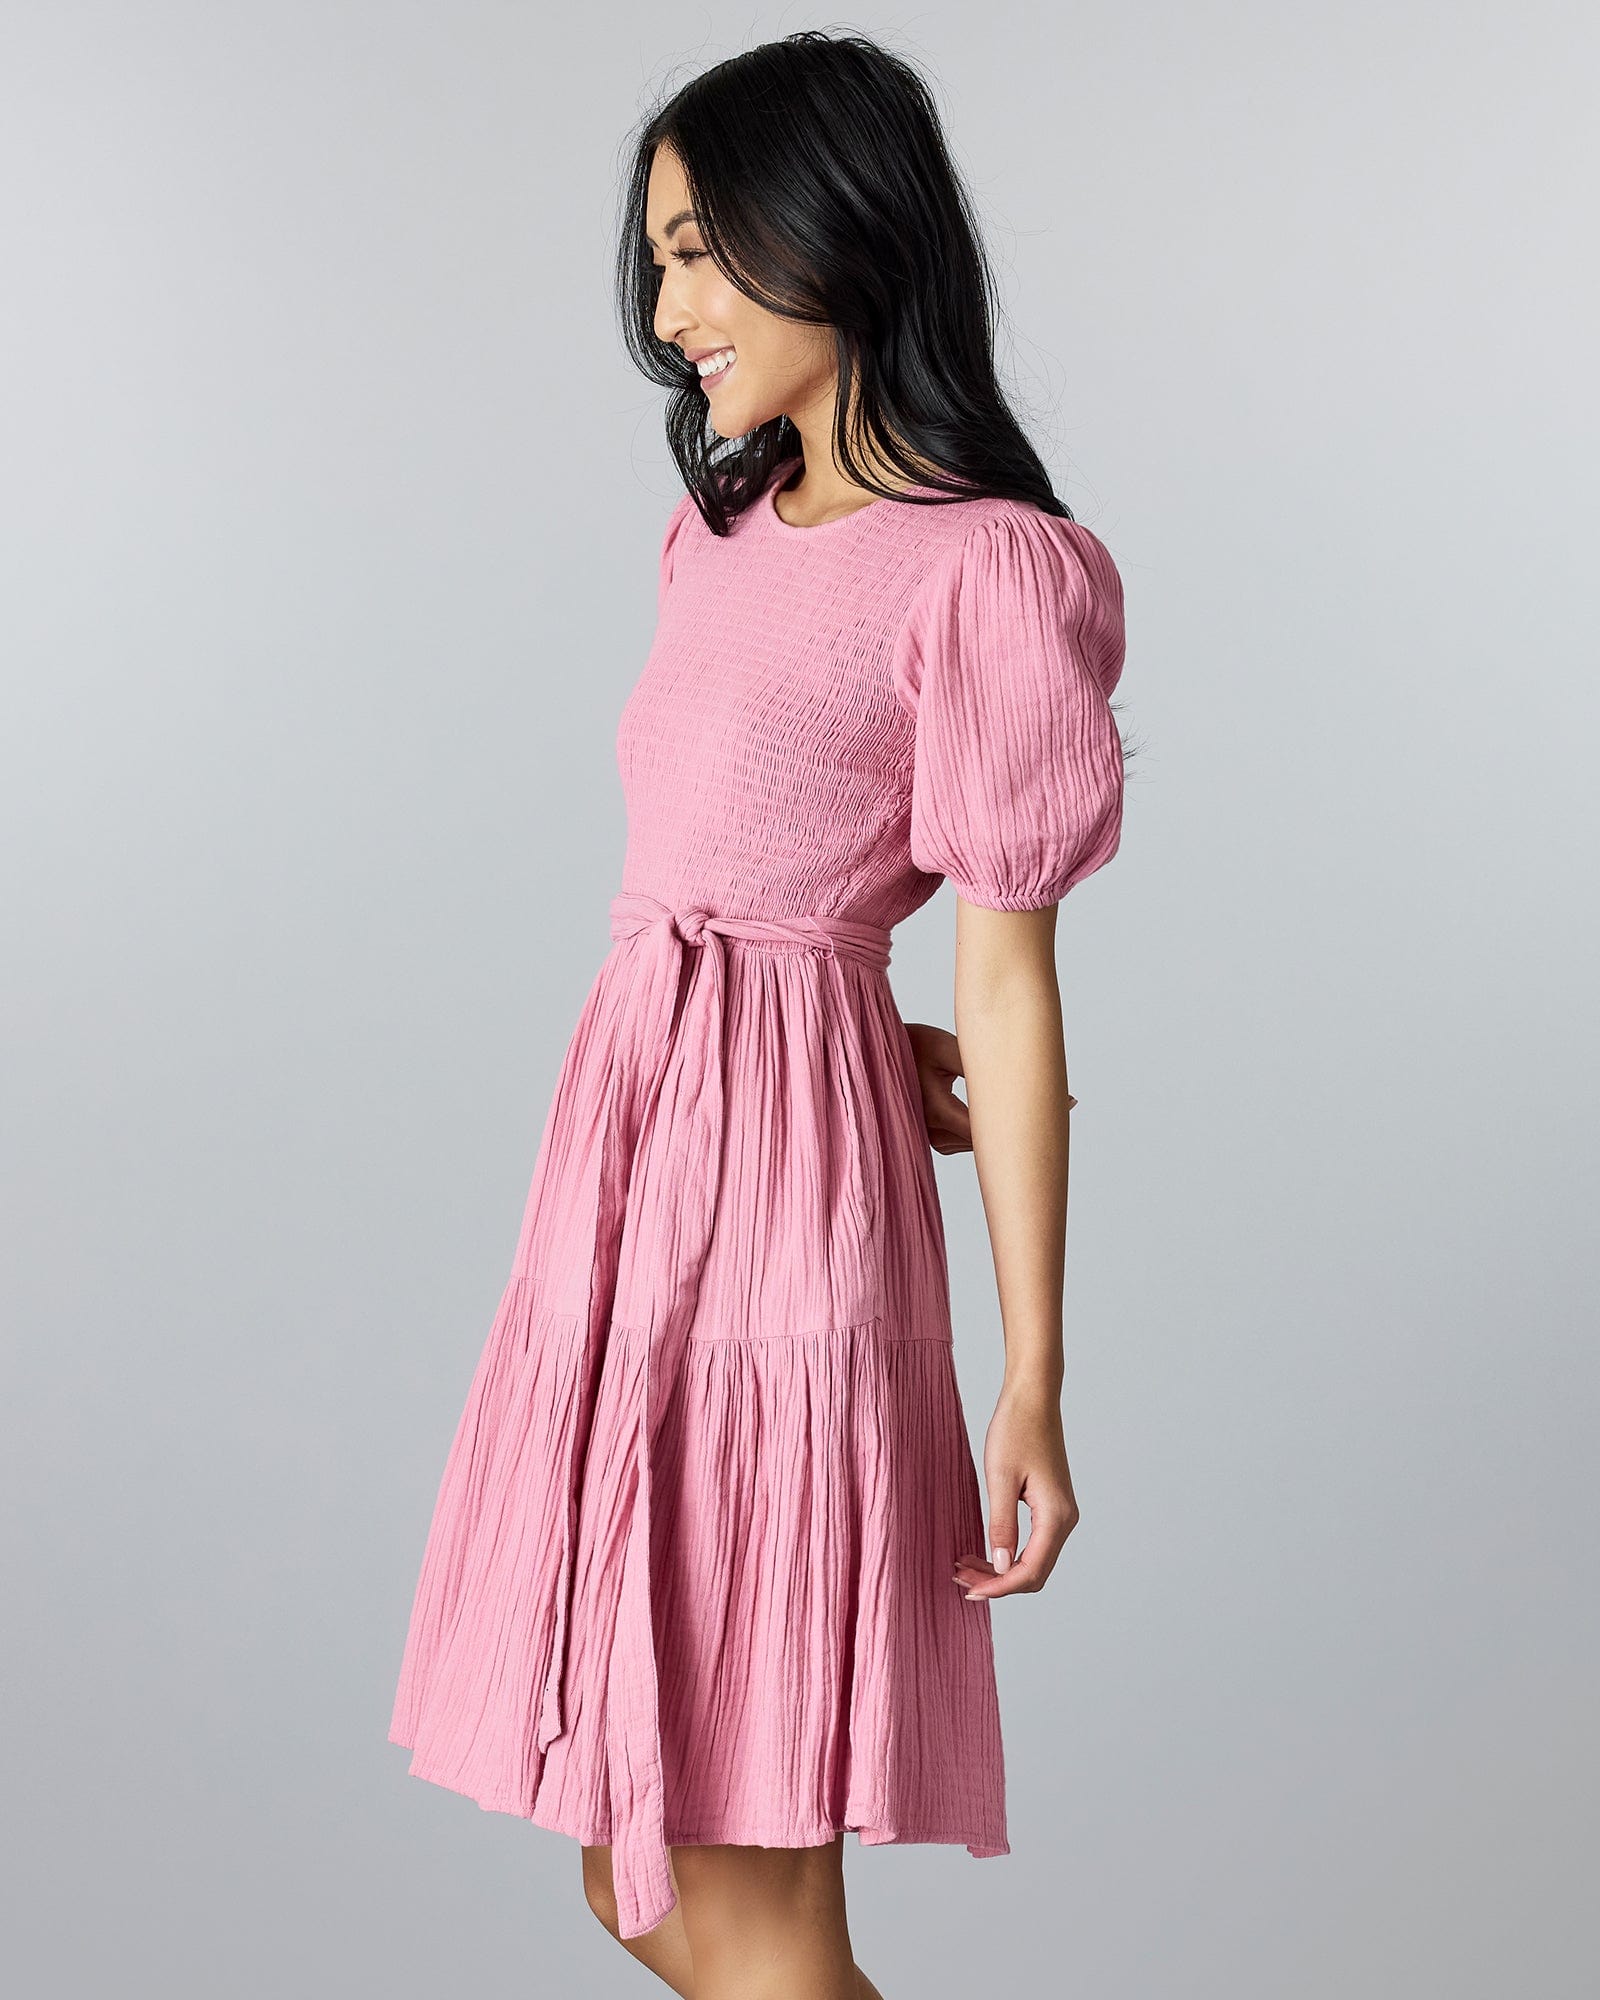 Woman in a pink, short sleeved, knee-length dress with smocking on bodice and a tie at the waist.